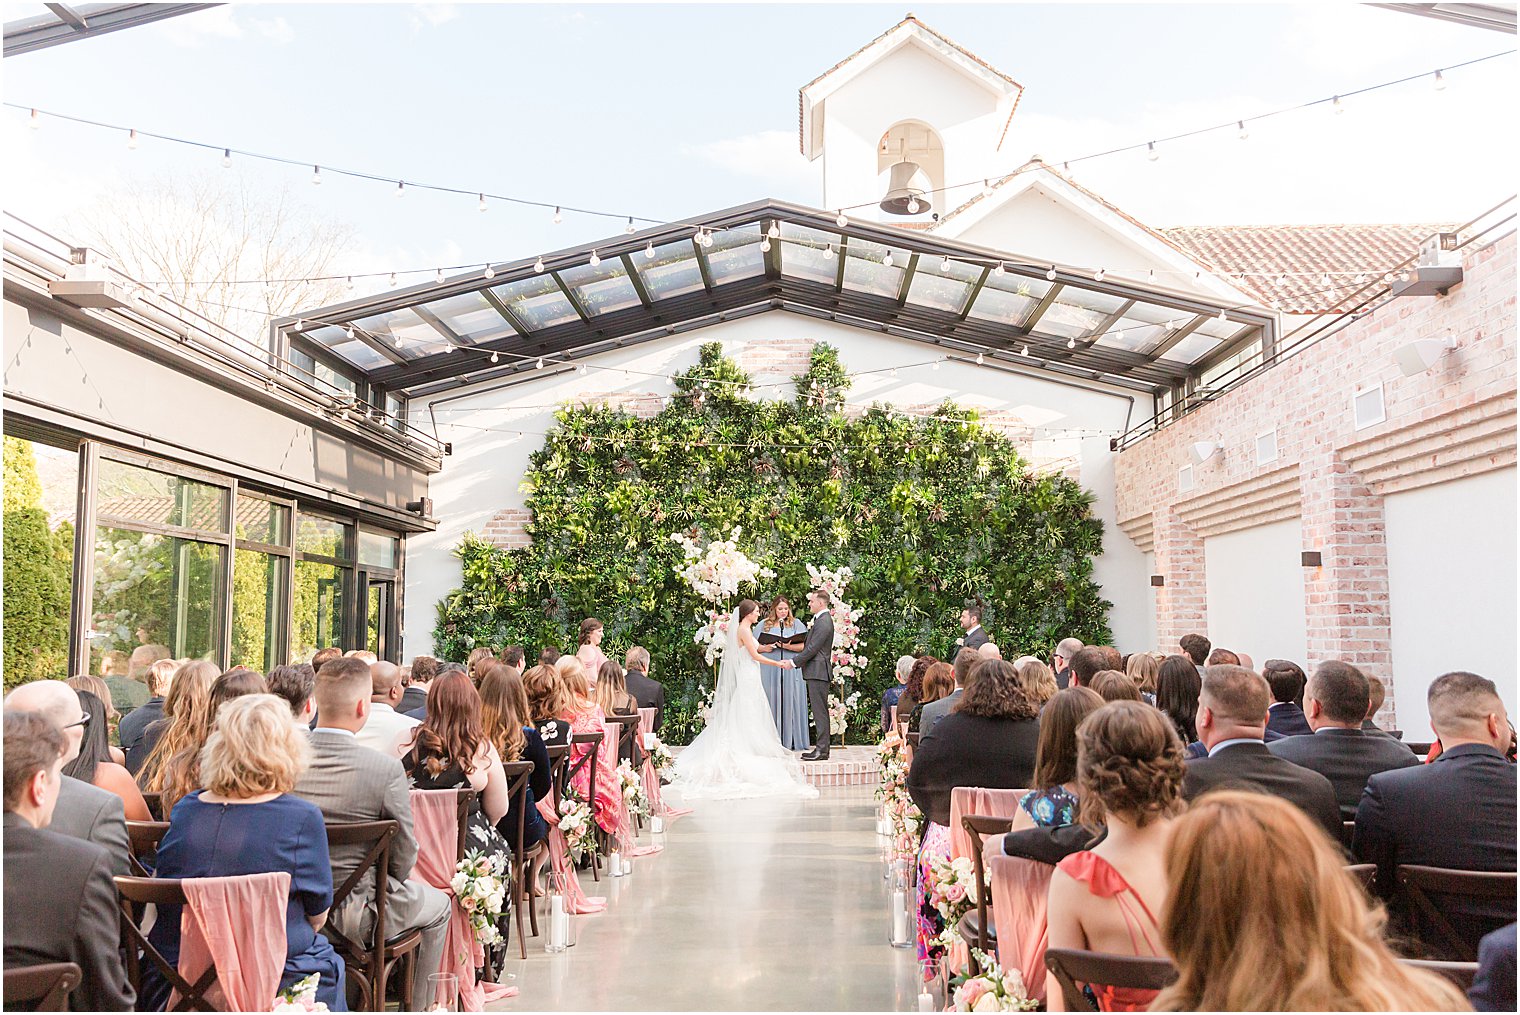 couple exchanges vows during outdoor wedding ceremony in courtyard